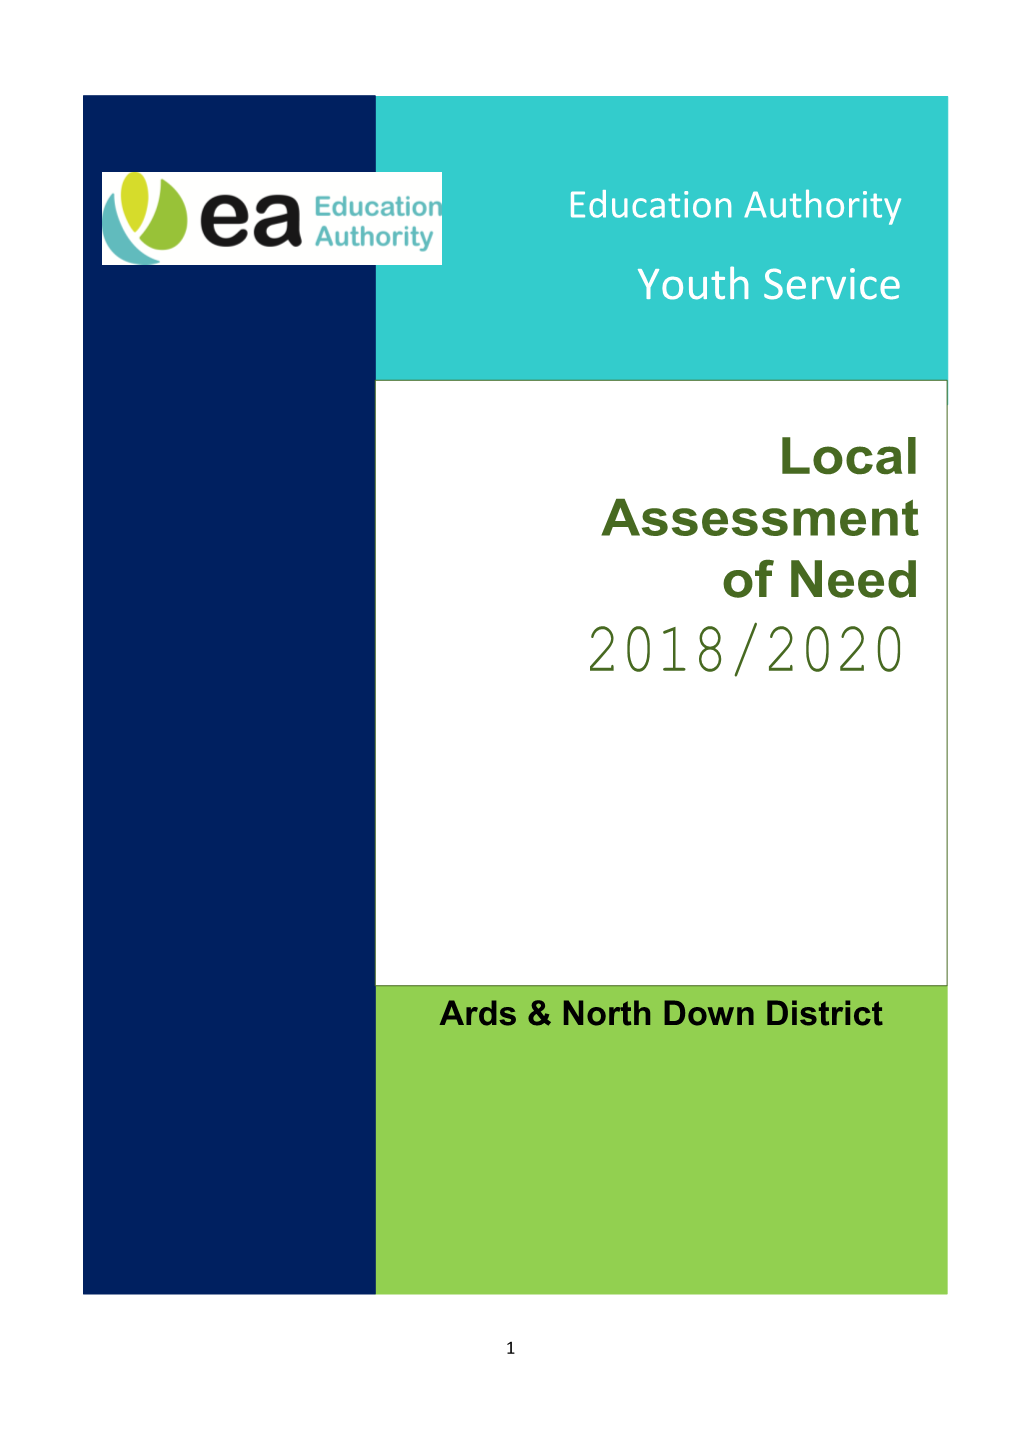 Ards & North Down Local Assessment of Need 2018-2020